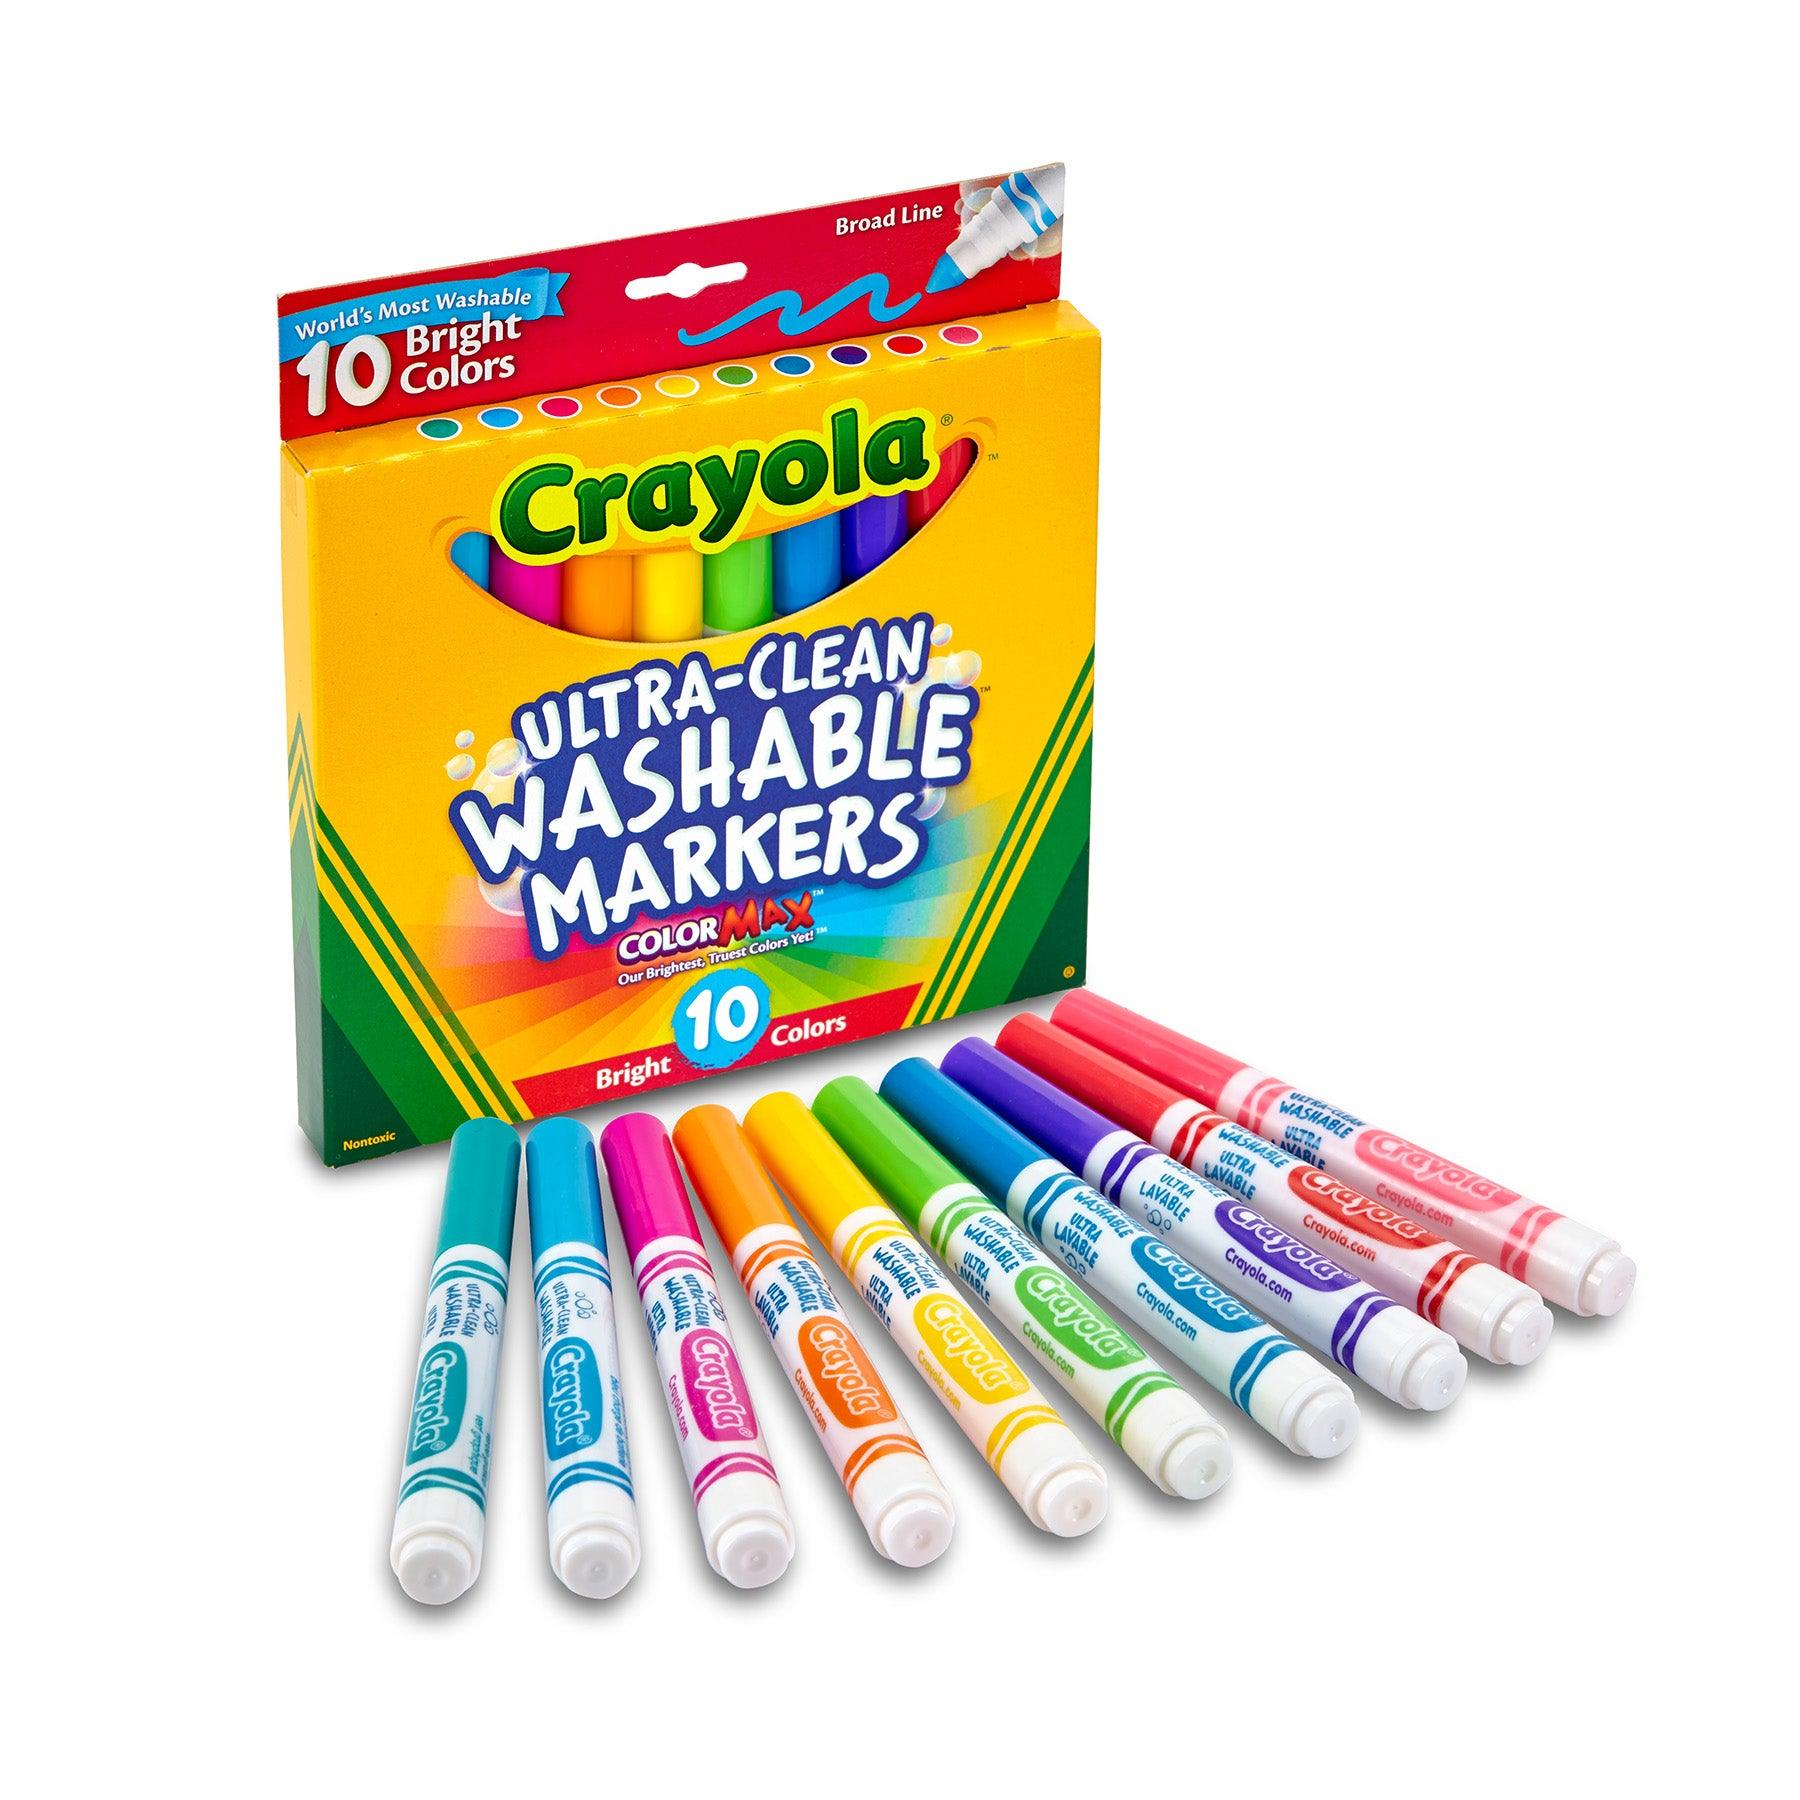 Ultra-Clean Washable Bright, Broad Line, Color Max Markers, 10 Per Pack, 6 Packs - Loomini